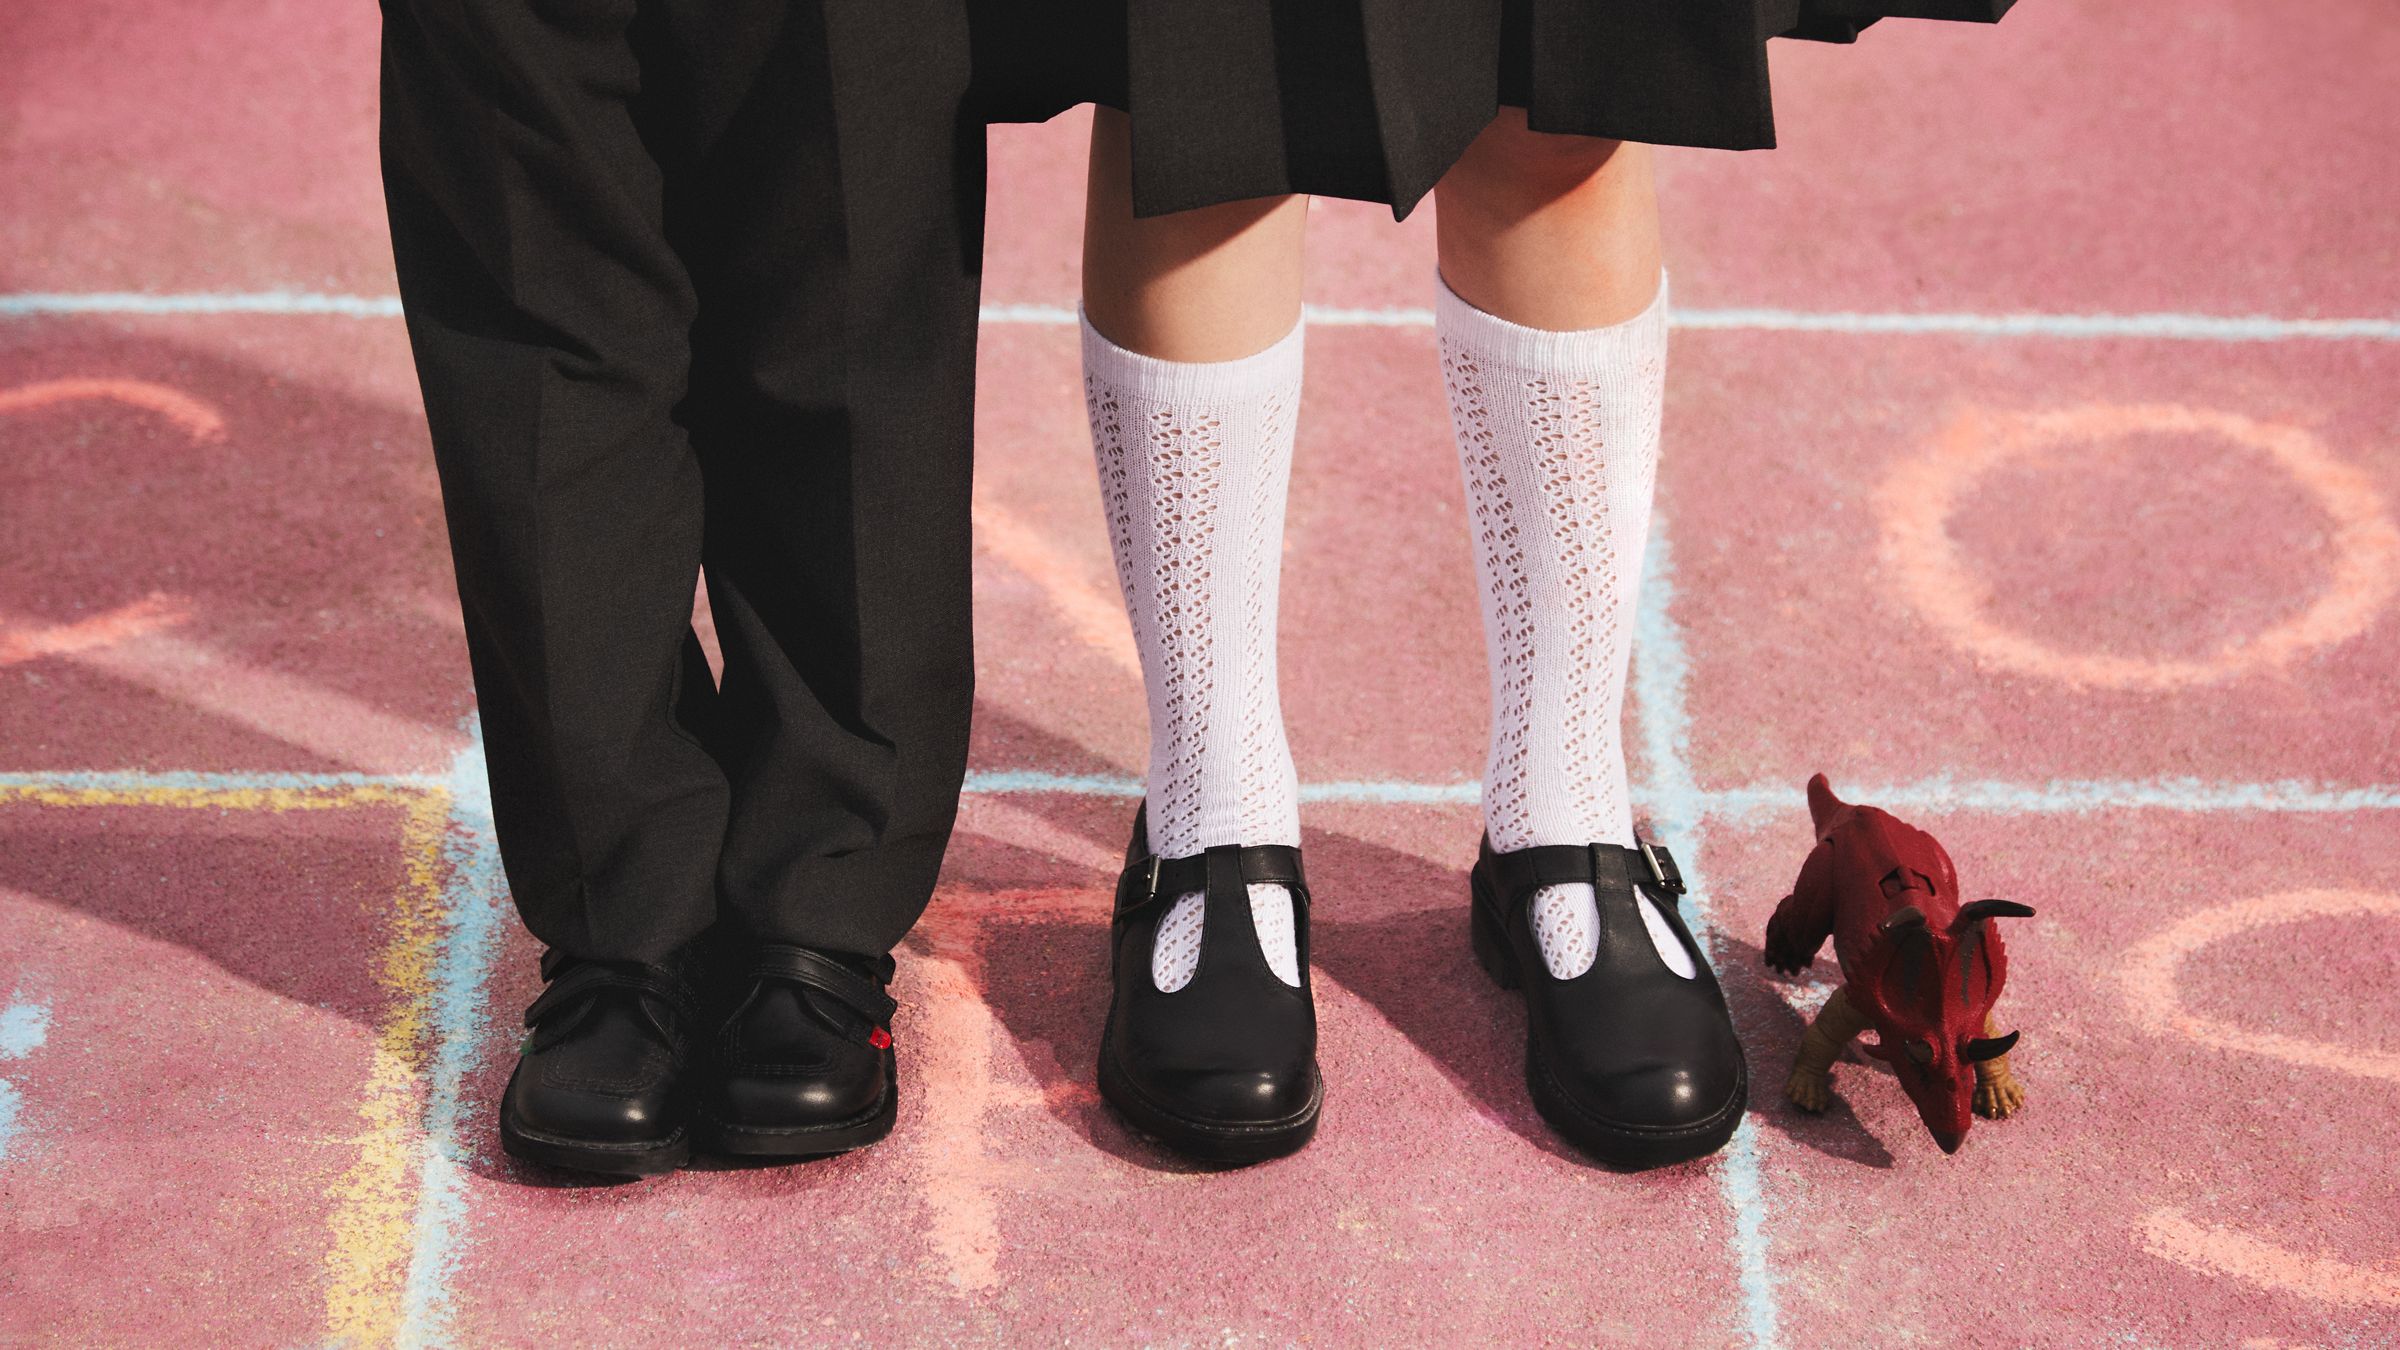 Close up image of two people wearing school shoes on the playground